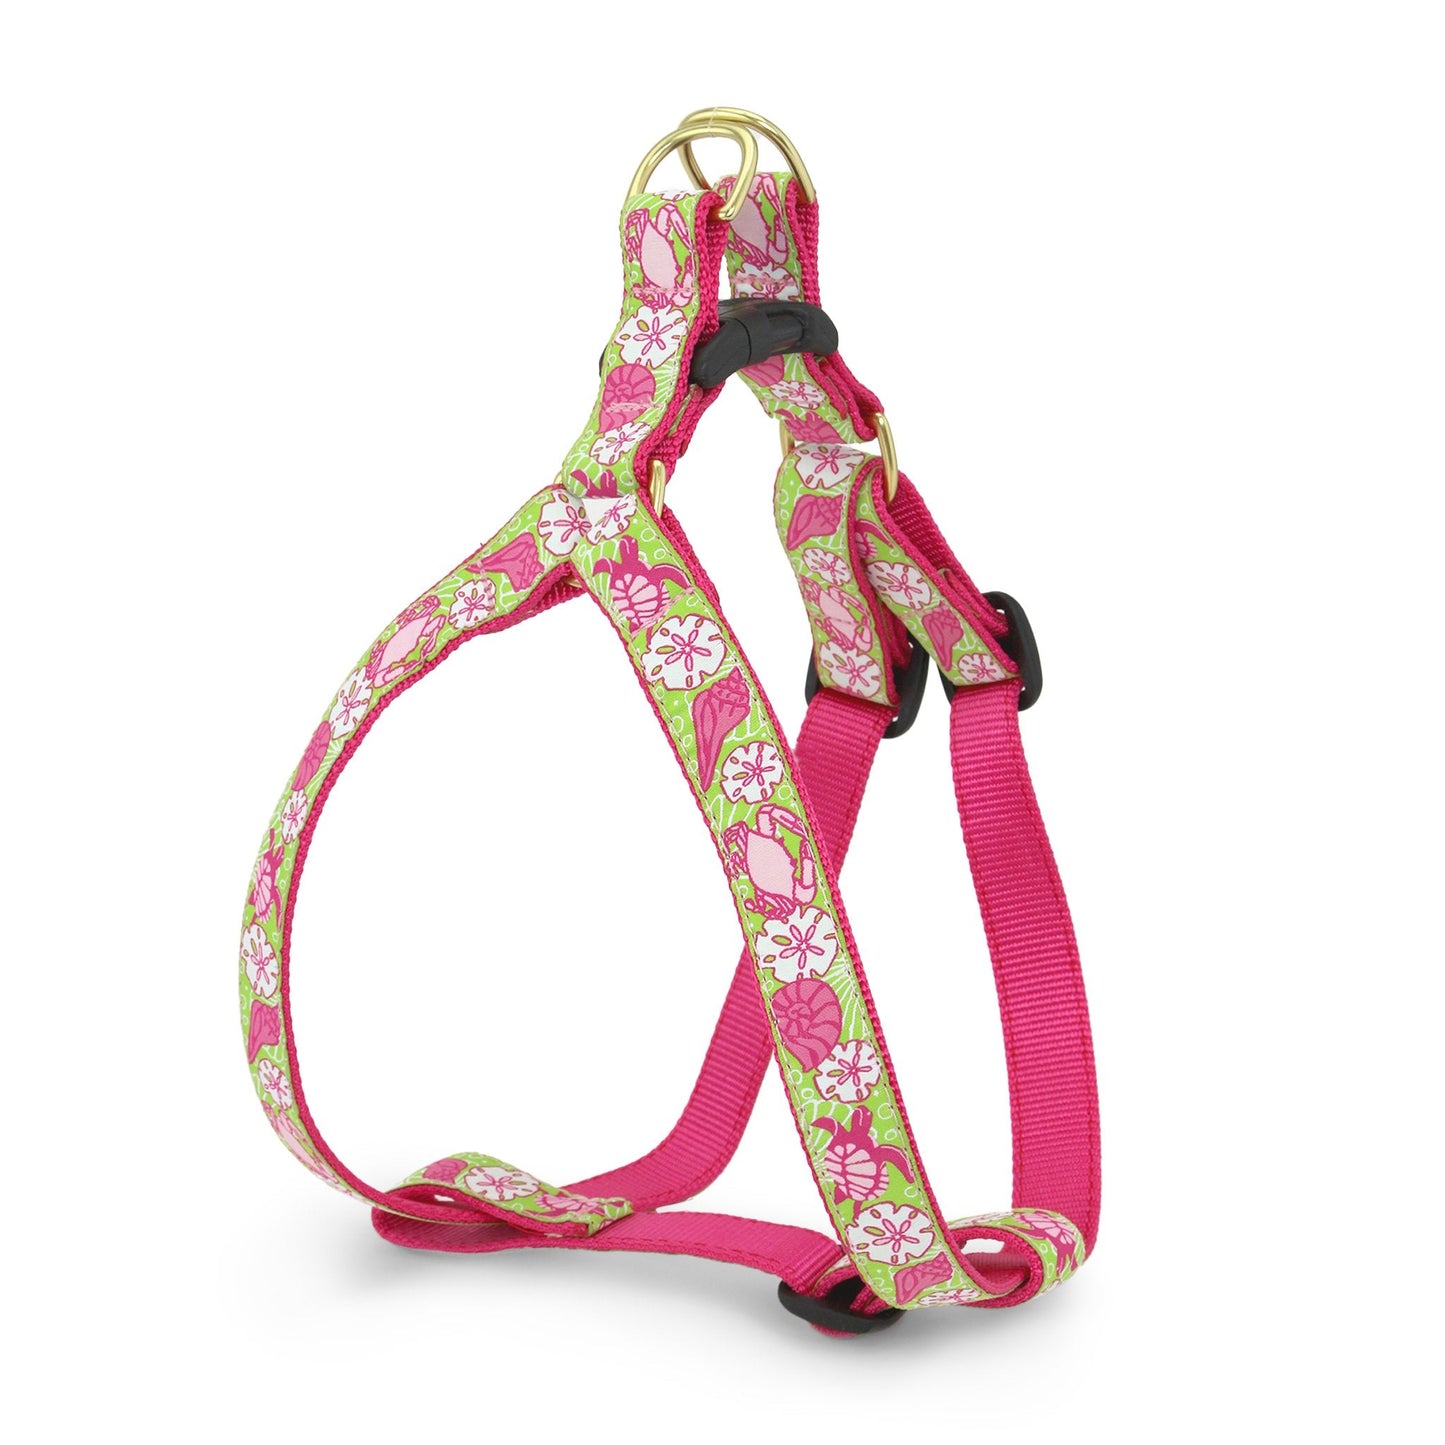 Sealife Dog Harness by Up Country